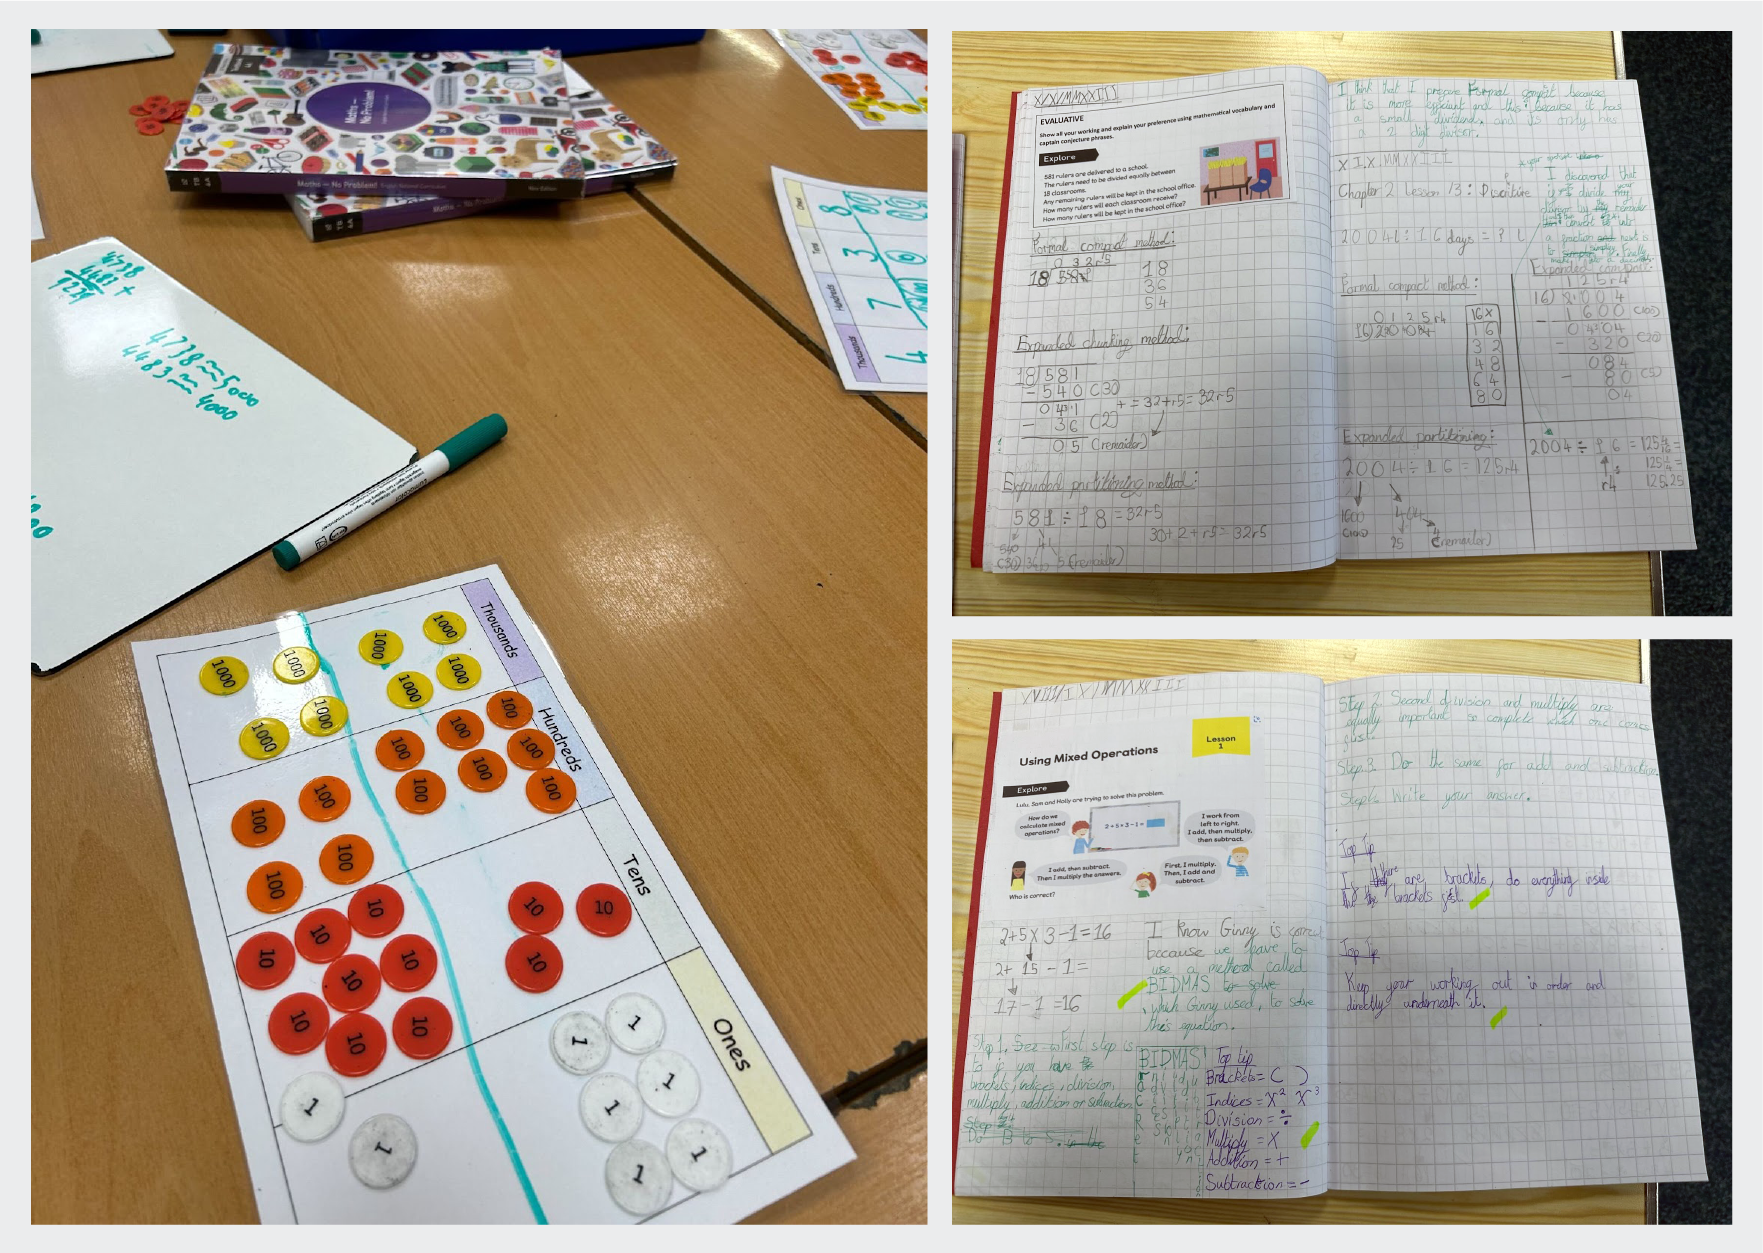 three images of journals and manipulatives